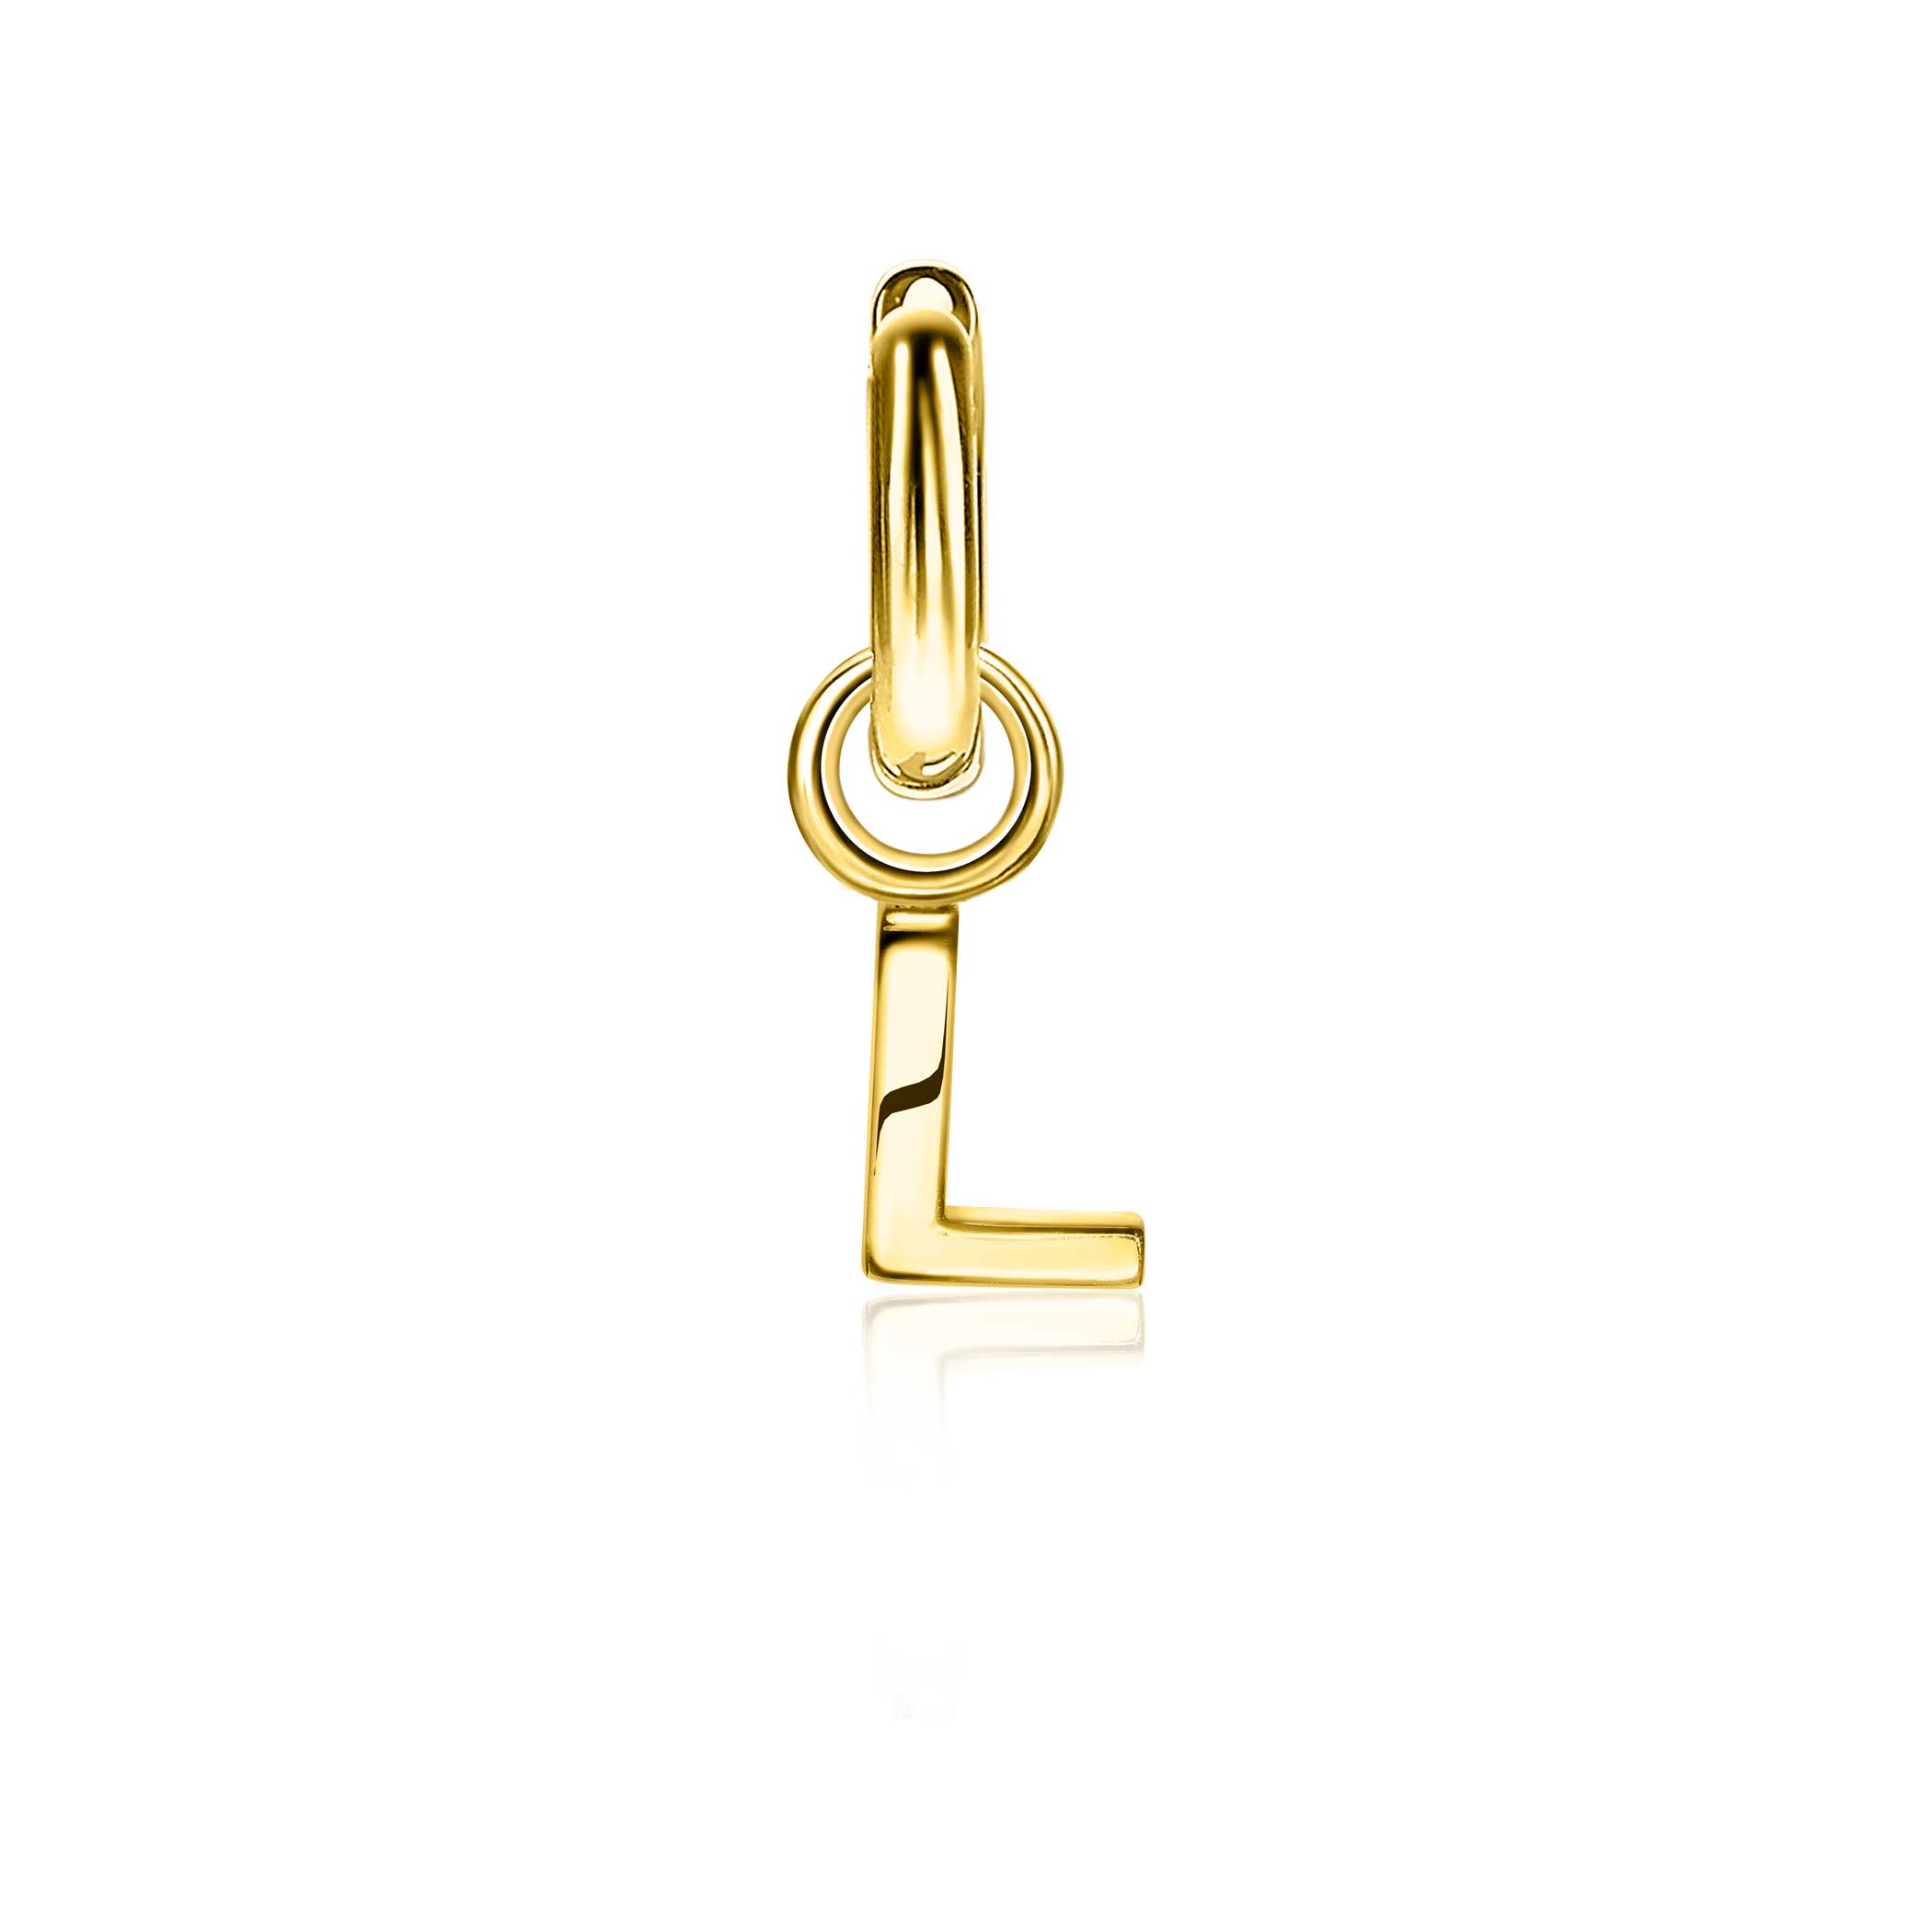 ZINZI Gold Plated Letter Earrings Pendant L price per piece ZICH2145L (excl. hoop earrings)